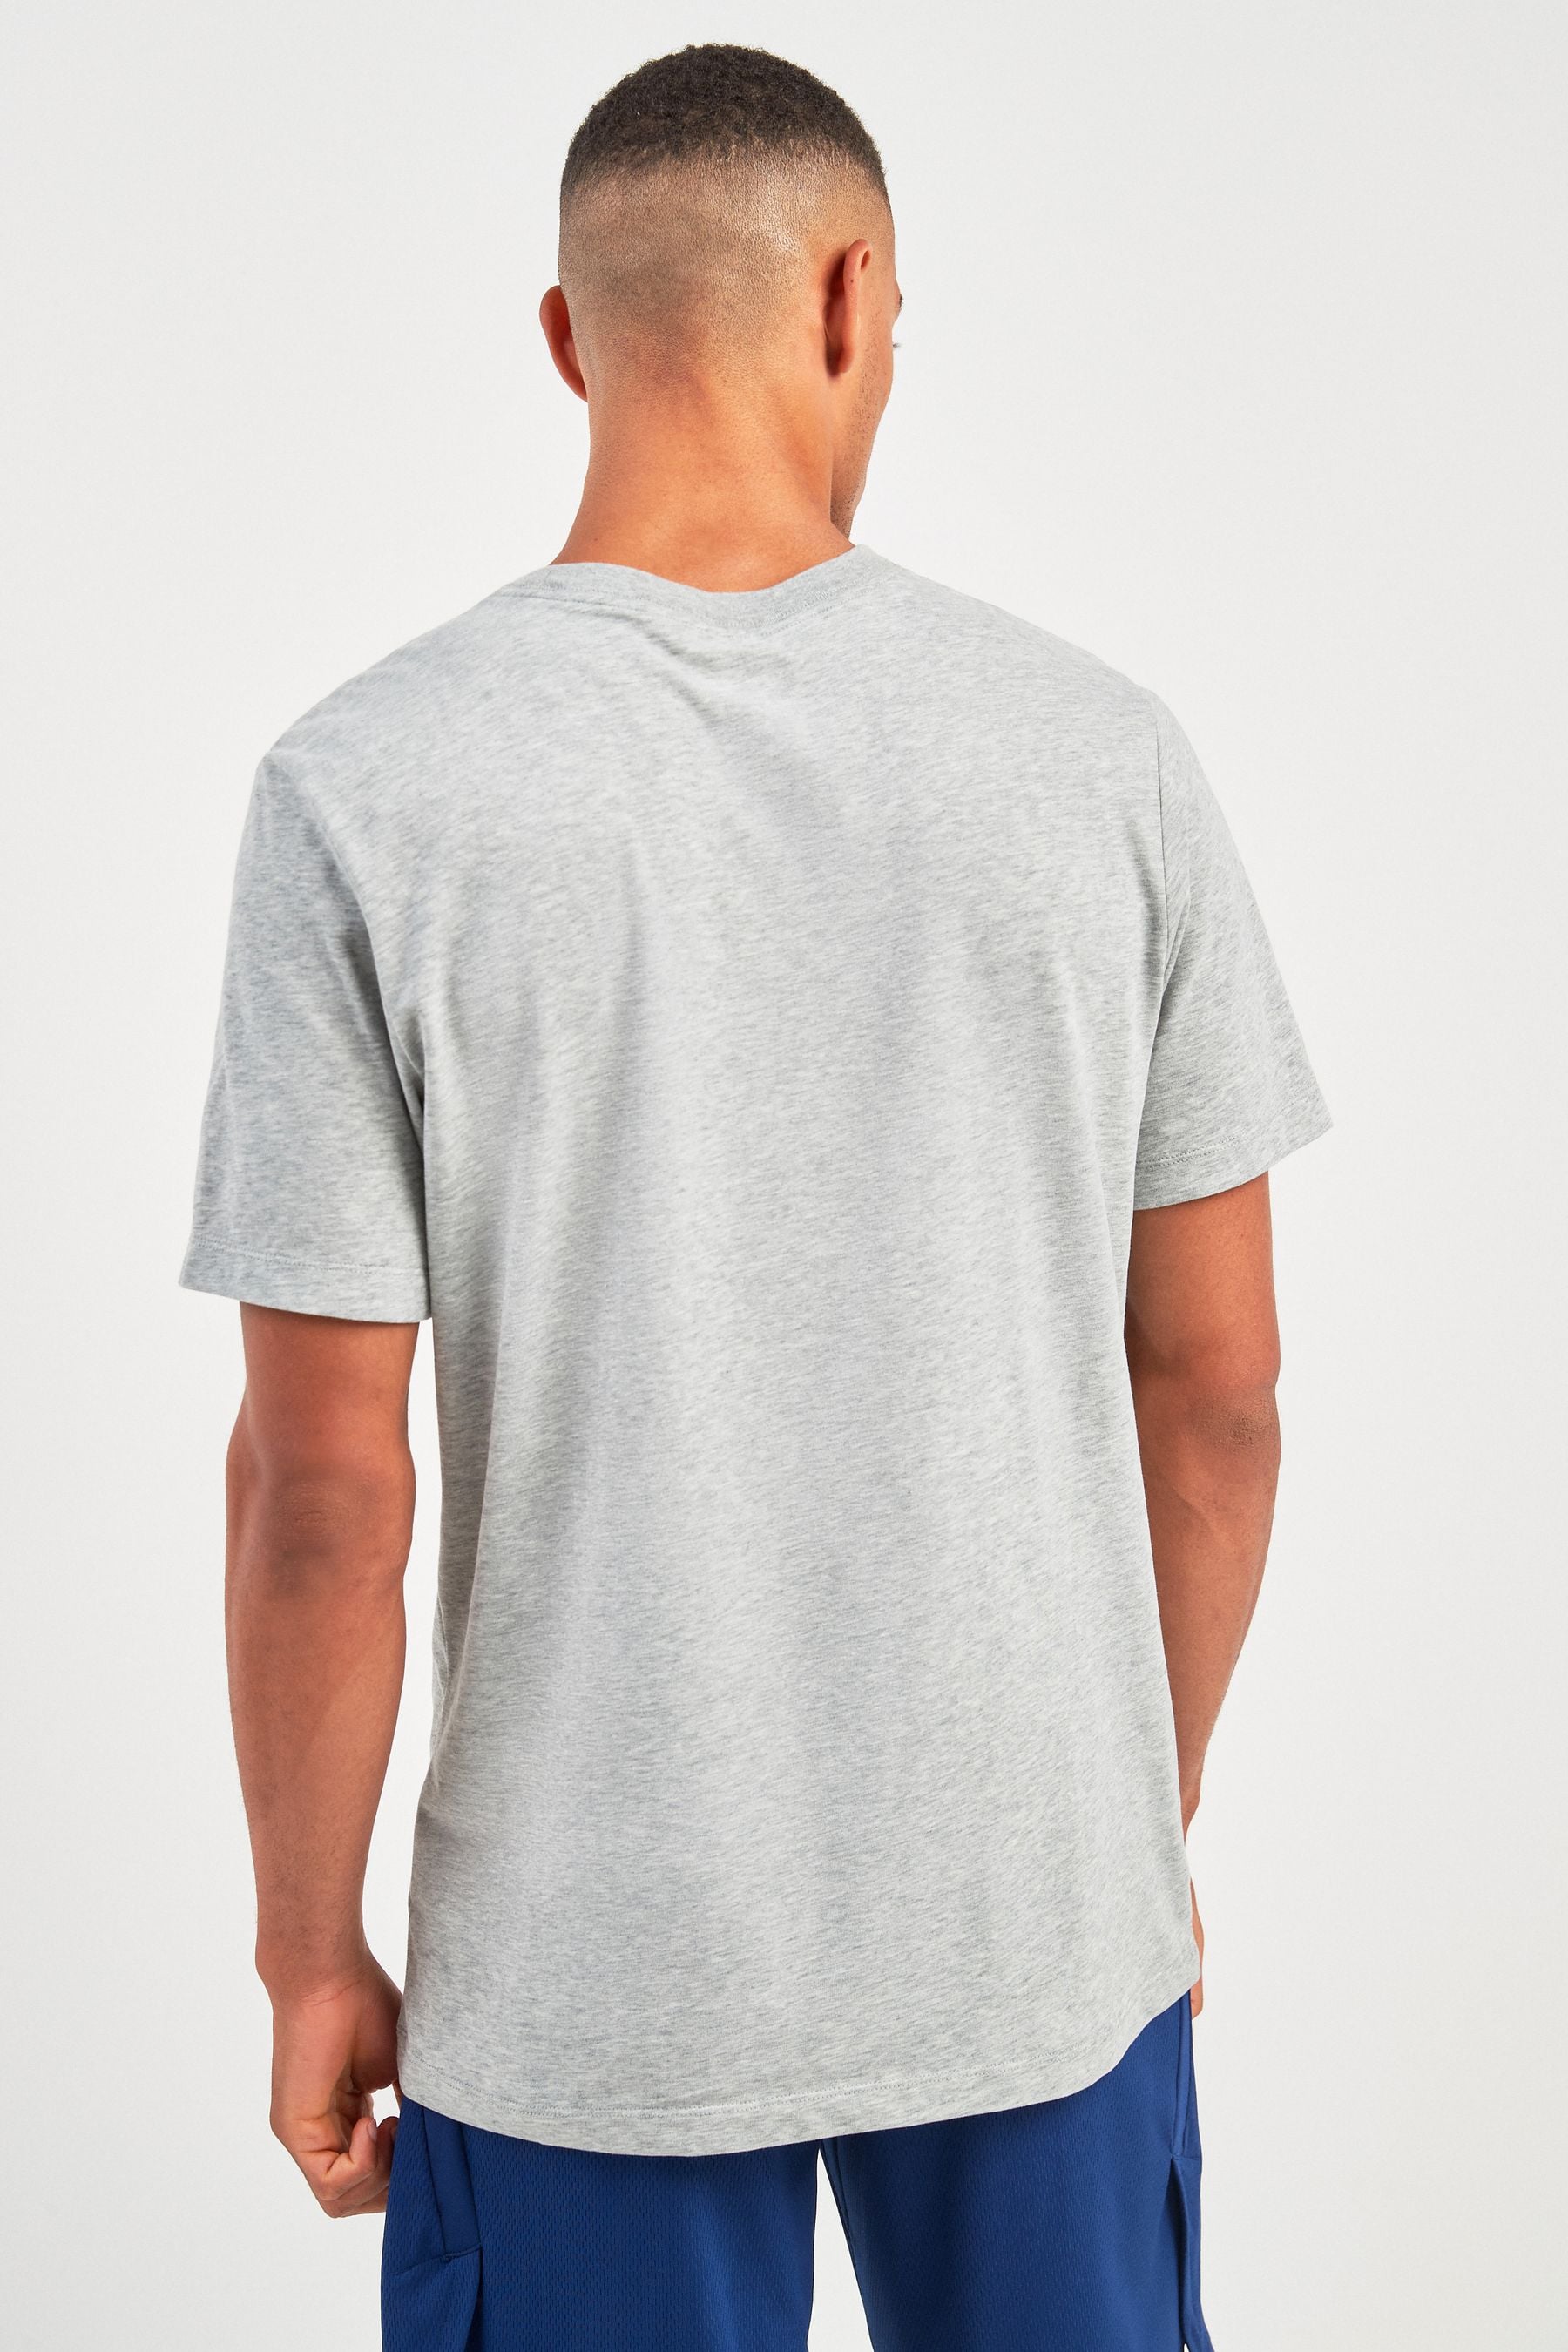 Buy Nike Grey Dri-FIT Training T-Shirt from the Next UK online shop